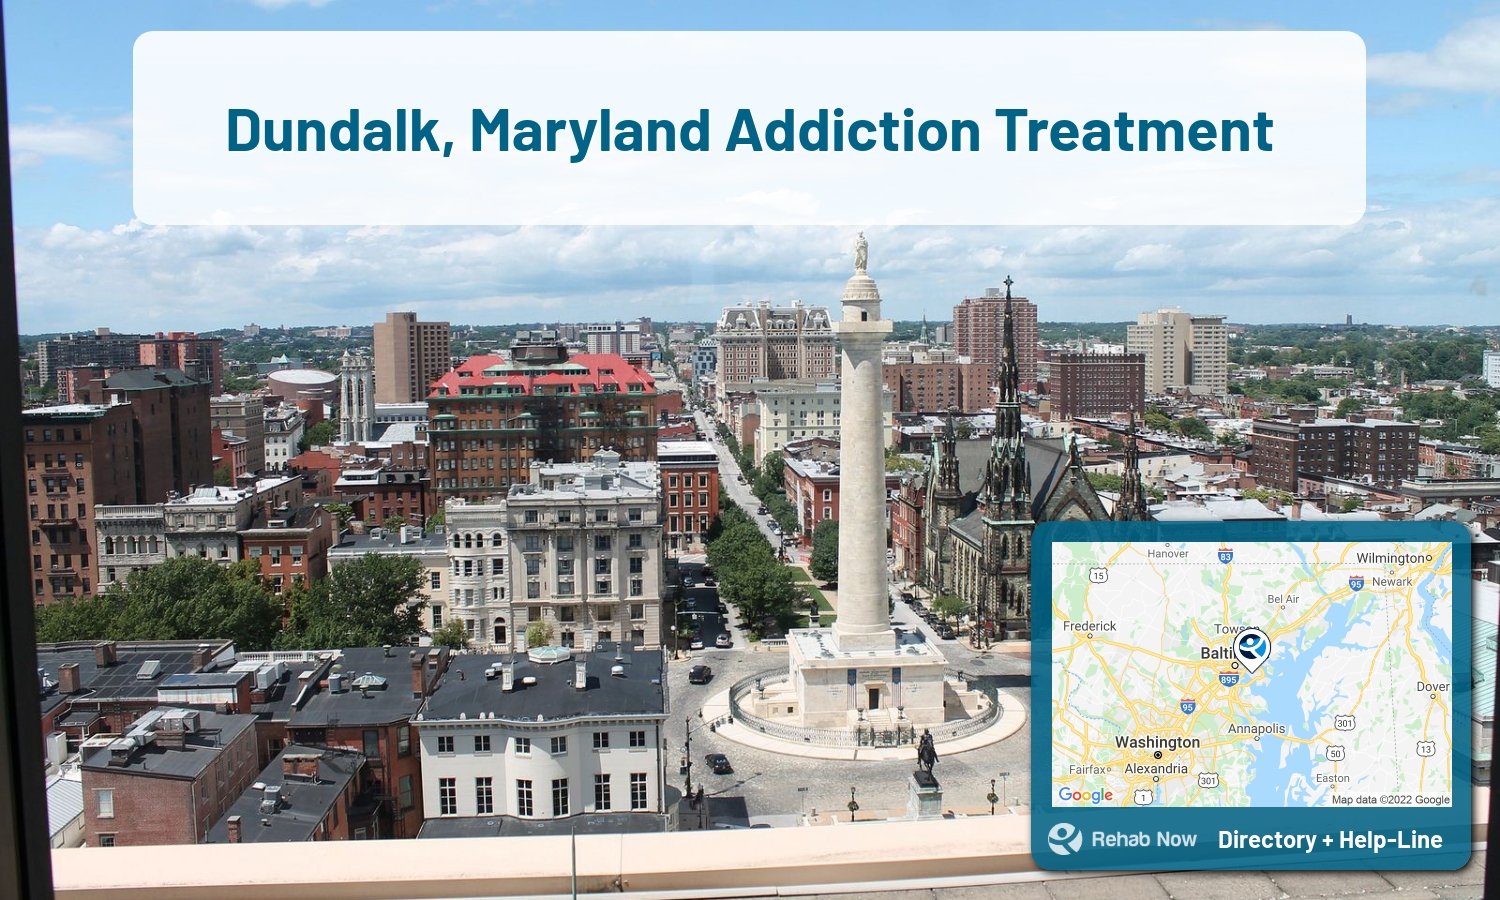 Dundalk, MD Treatment Centers. Find drug rehab in Dundalk, Maryland, or detox and treatment programs. Get the right help now!